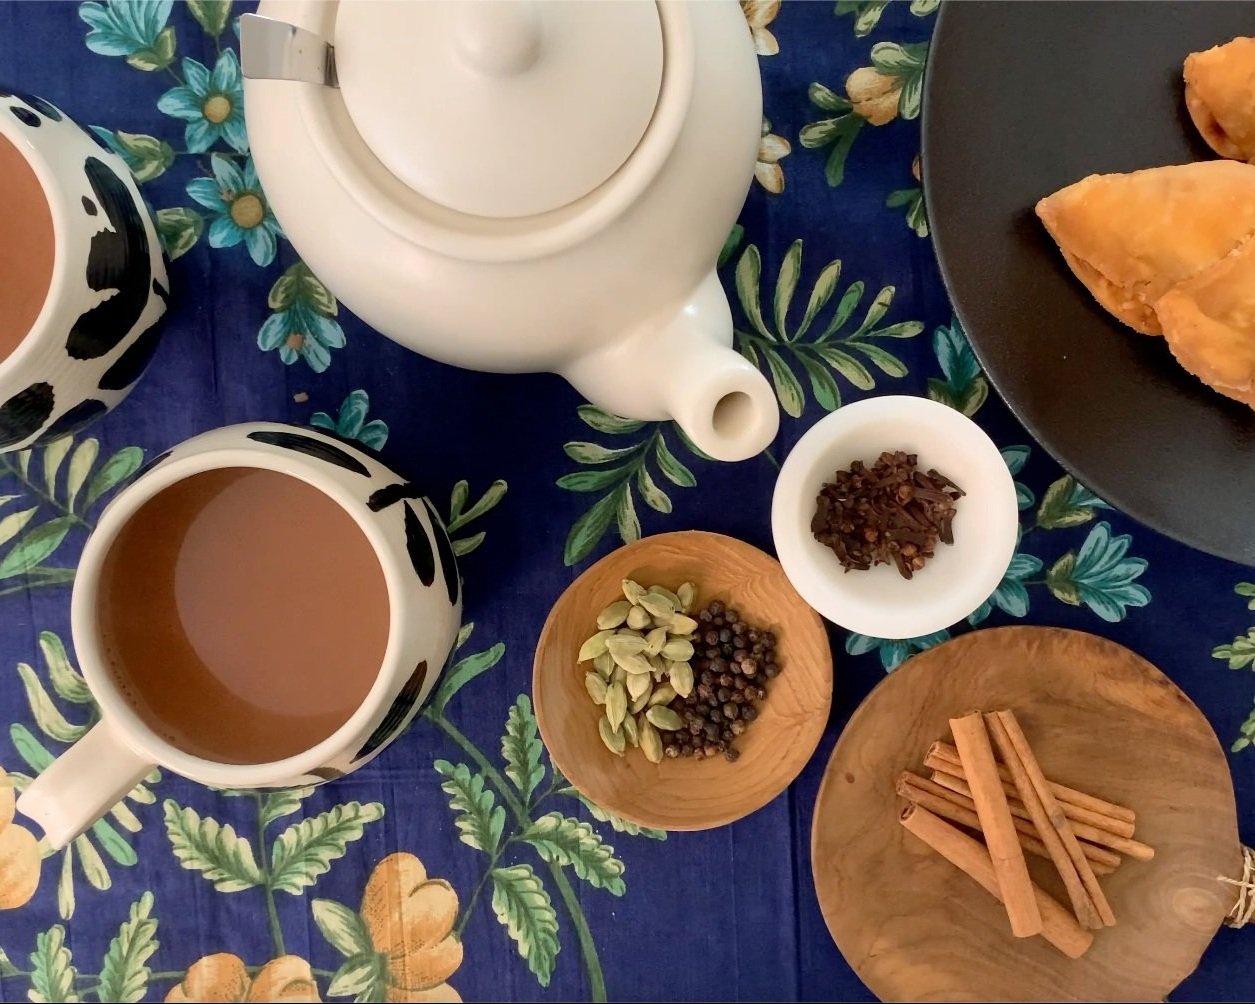 How to Make Indian Tea (a.k.a Chai) : 5 Steps - Instructables